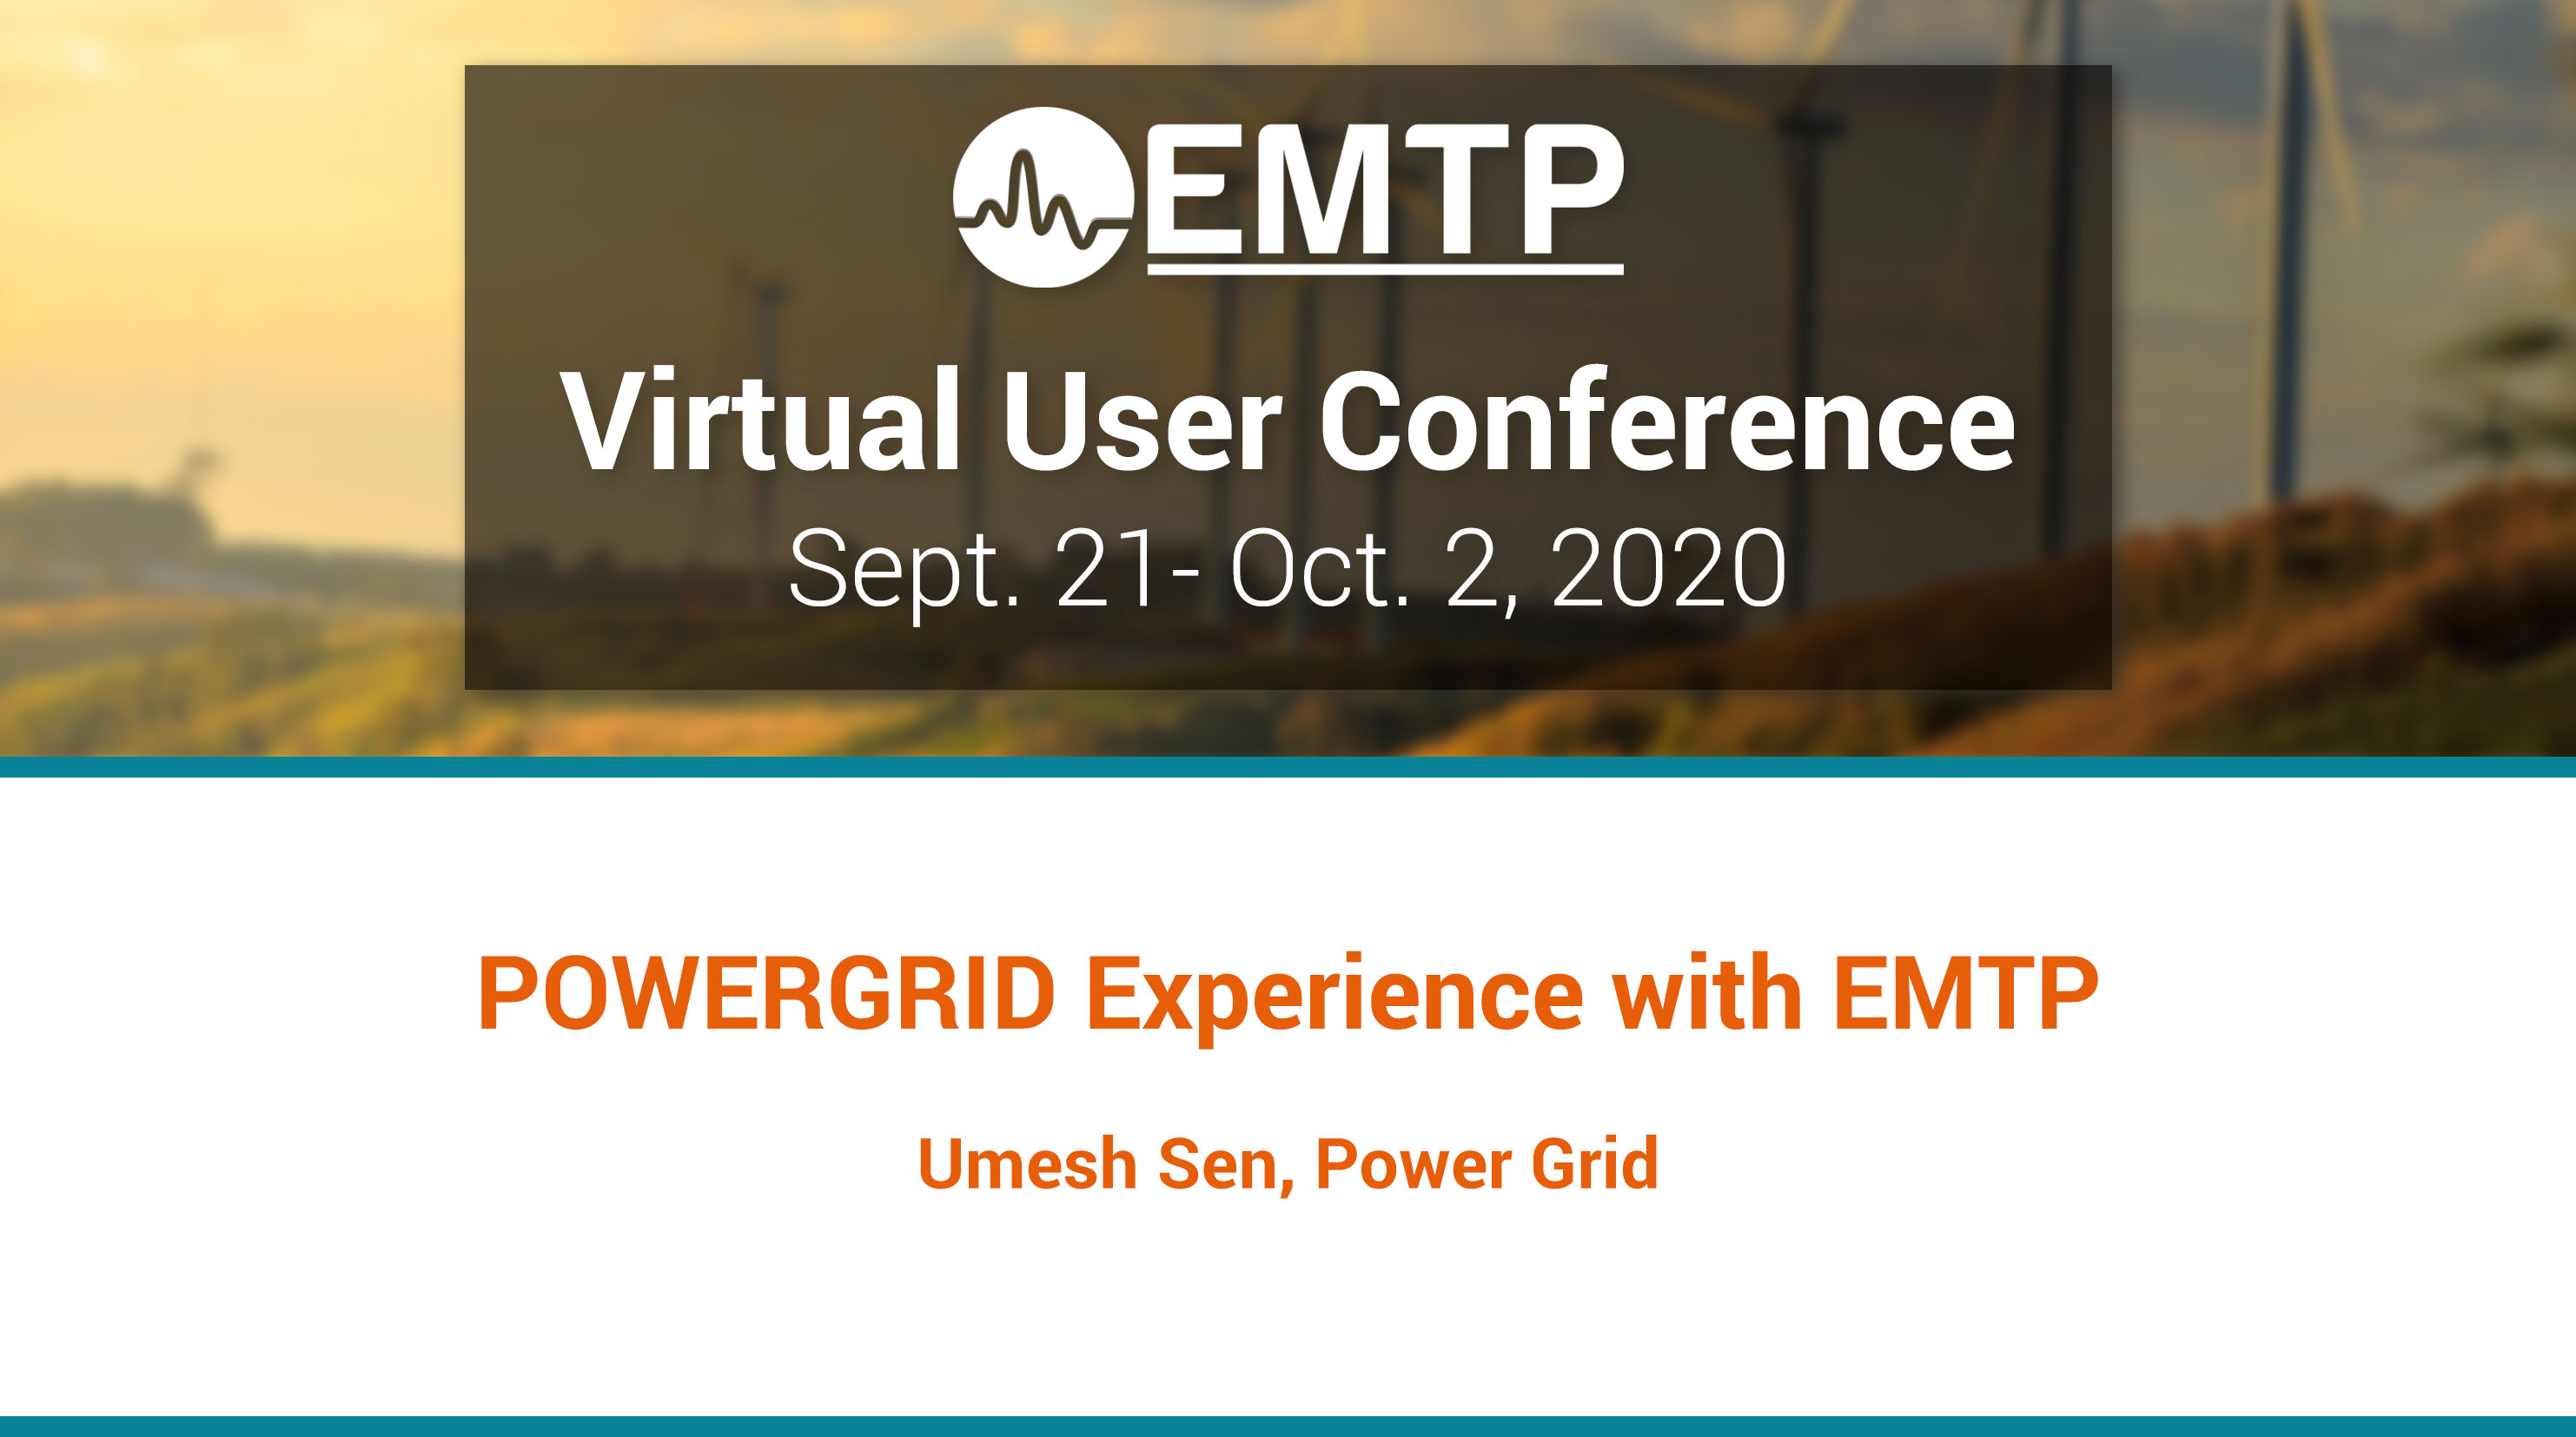 POWERGRID experience with EMTP